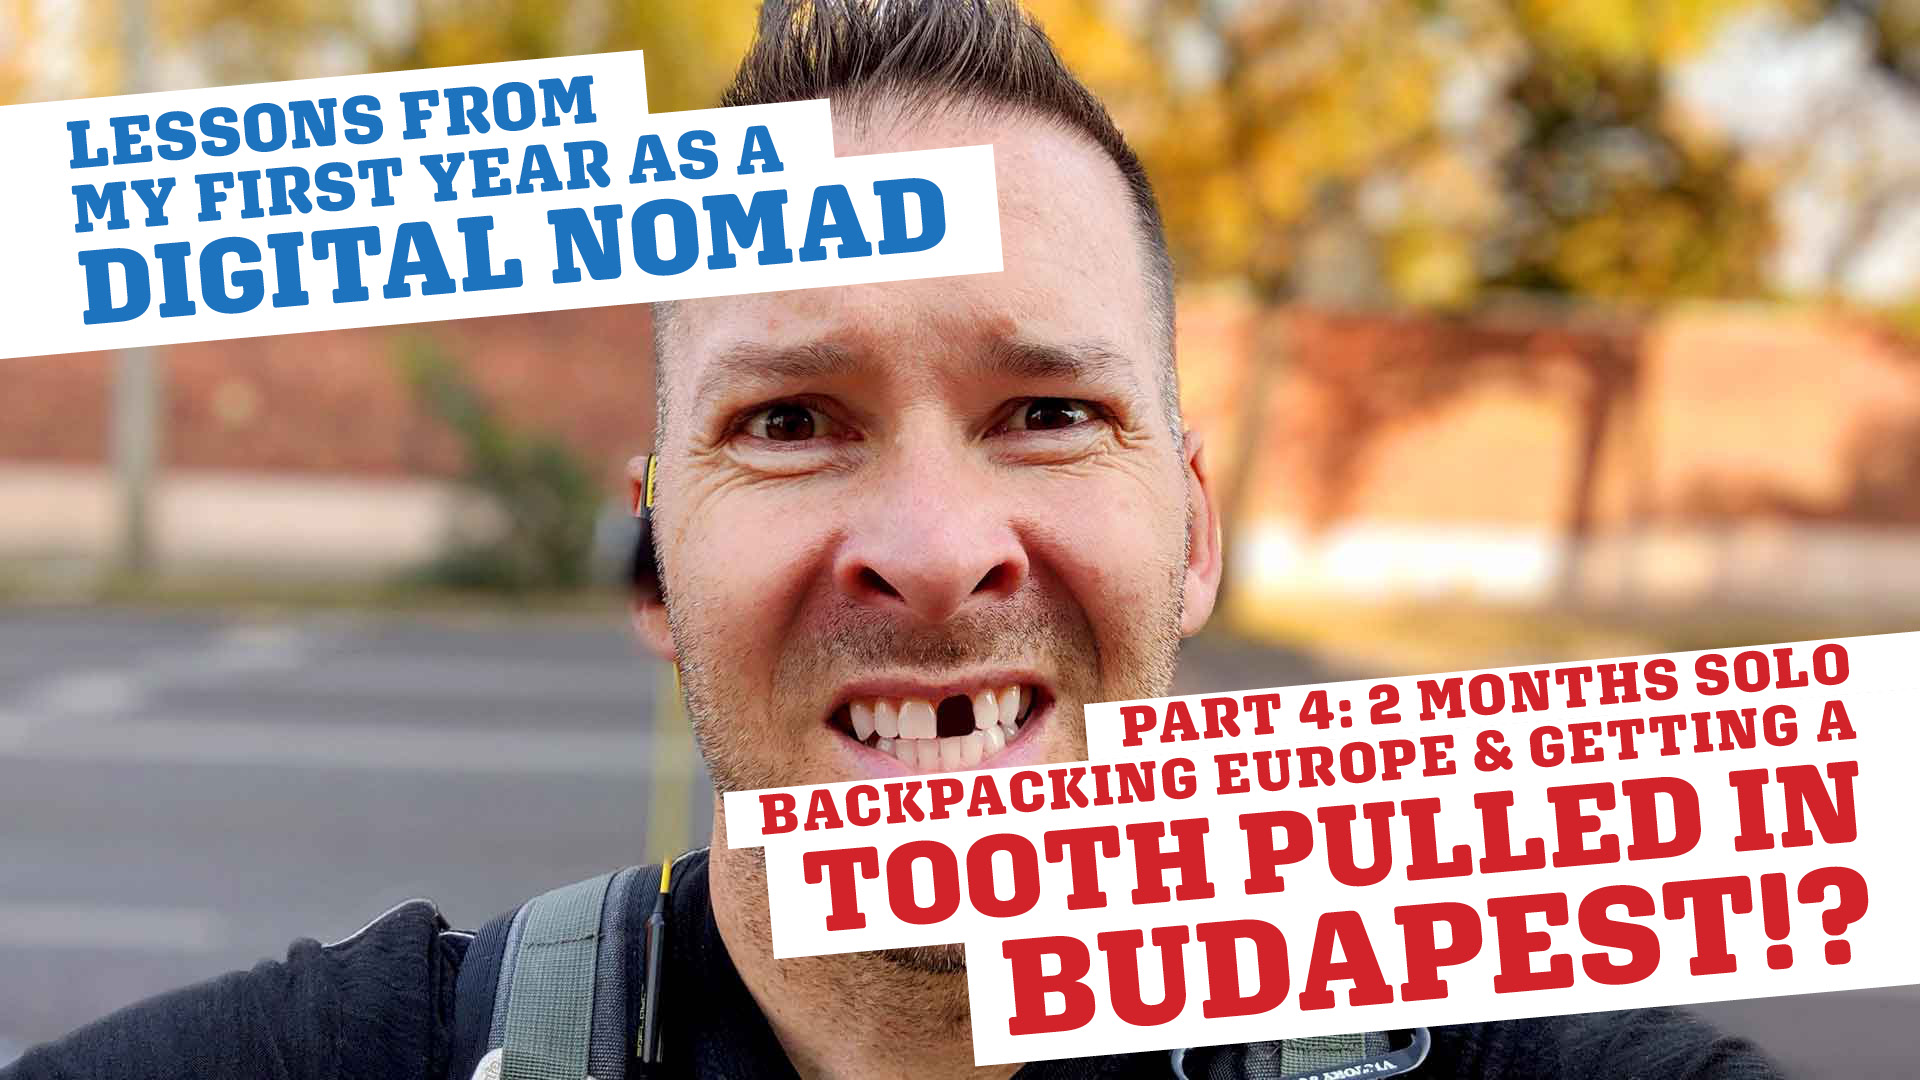 The Nomad Experiment Lessons of a Digital nomad Backpacking Europe article part 4